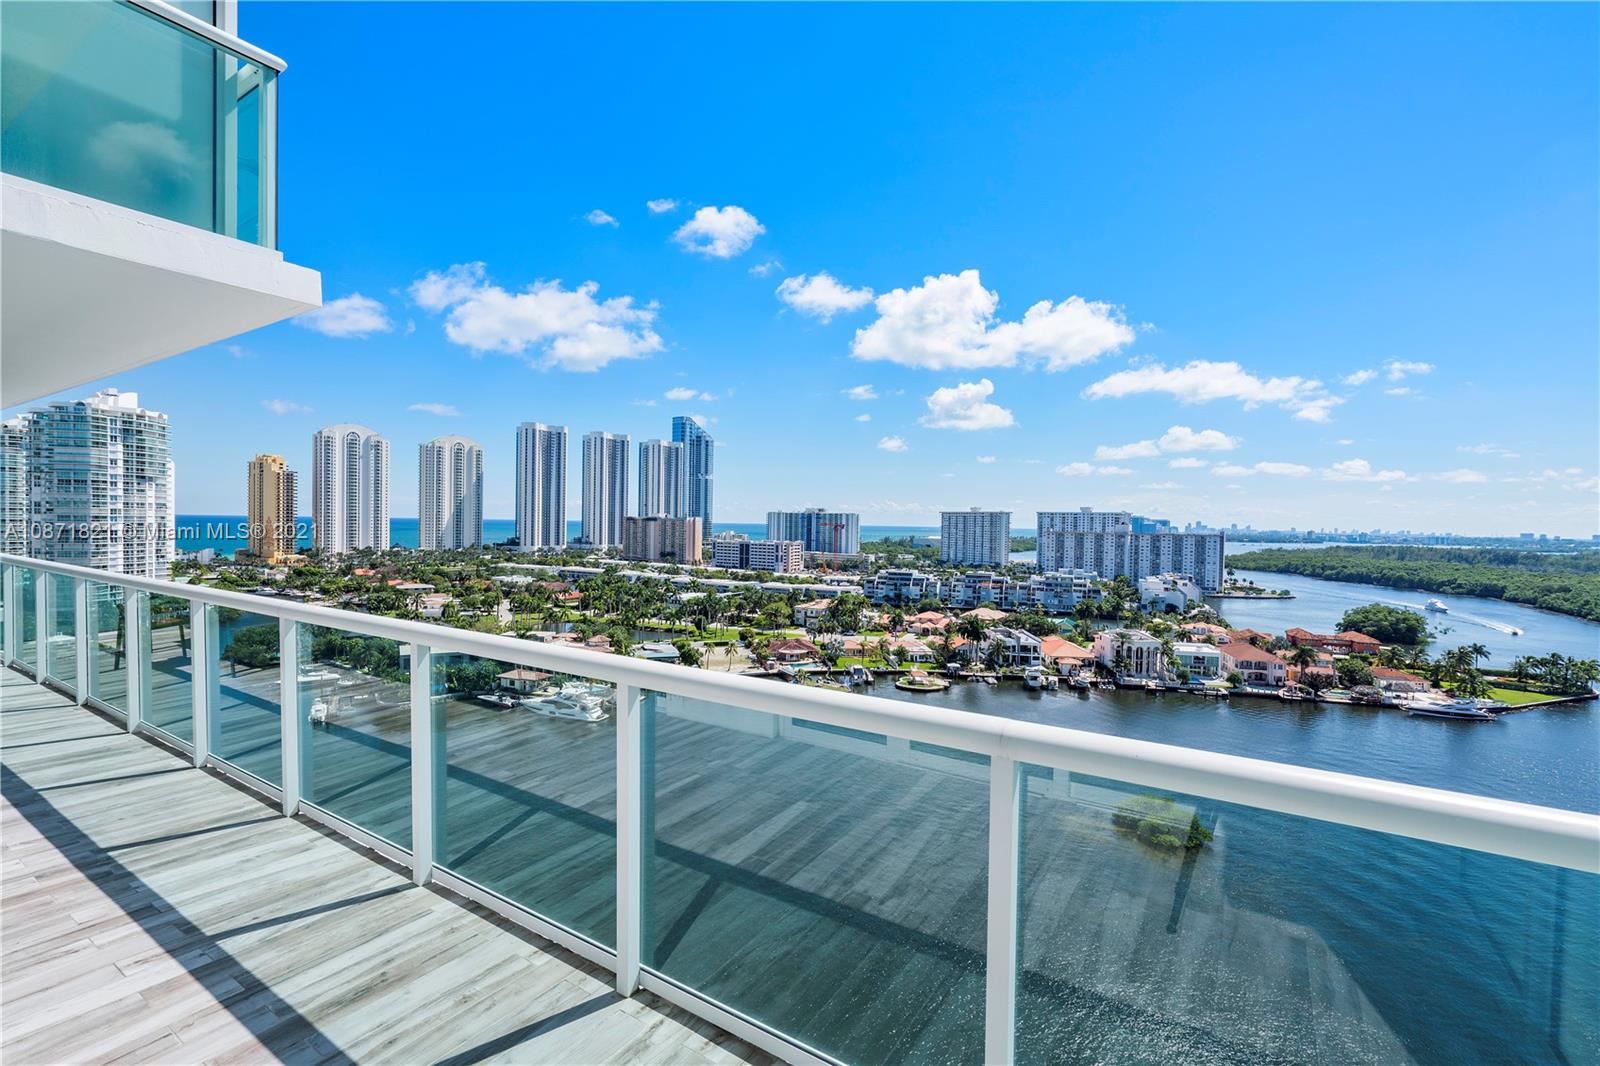 AMAZING NEW OPPORTUNITY AT 400 SUNNY ISLES! Very saw after split floor plan, with large balcony exposing stunning panoramic Intracoastal views with Sunny Isles Skyscrapers bordering the sky on the left and Oleta National Park on the right, gorgeous to relax and enjoy. This luxury 3 Bedrooms/3 Baths condo unit, fully furnished by Crate & Barrel, features a Master Suite with a very large walk-in closet. The living room features lots of natural light. Full-Service building, 24hrs front desk, gym, Tennis court, Pool, Marina, Valet. Walking distance to Sunny Isles Beach, near Aventura Mall, Bal Harbour Mall, schools, and world-class restaurants. Featuring resort-style pool deck with full-service private Marina and boat with wet and dry slips, to all residents. Seller motivated.